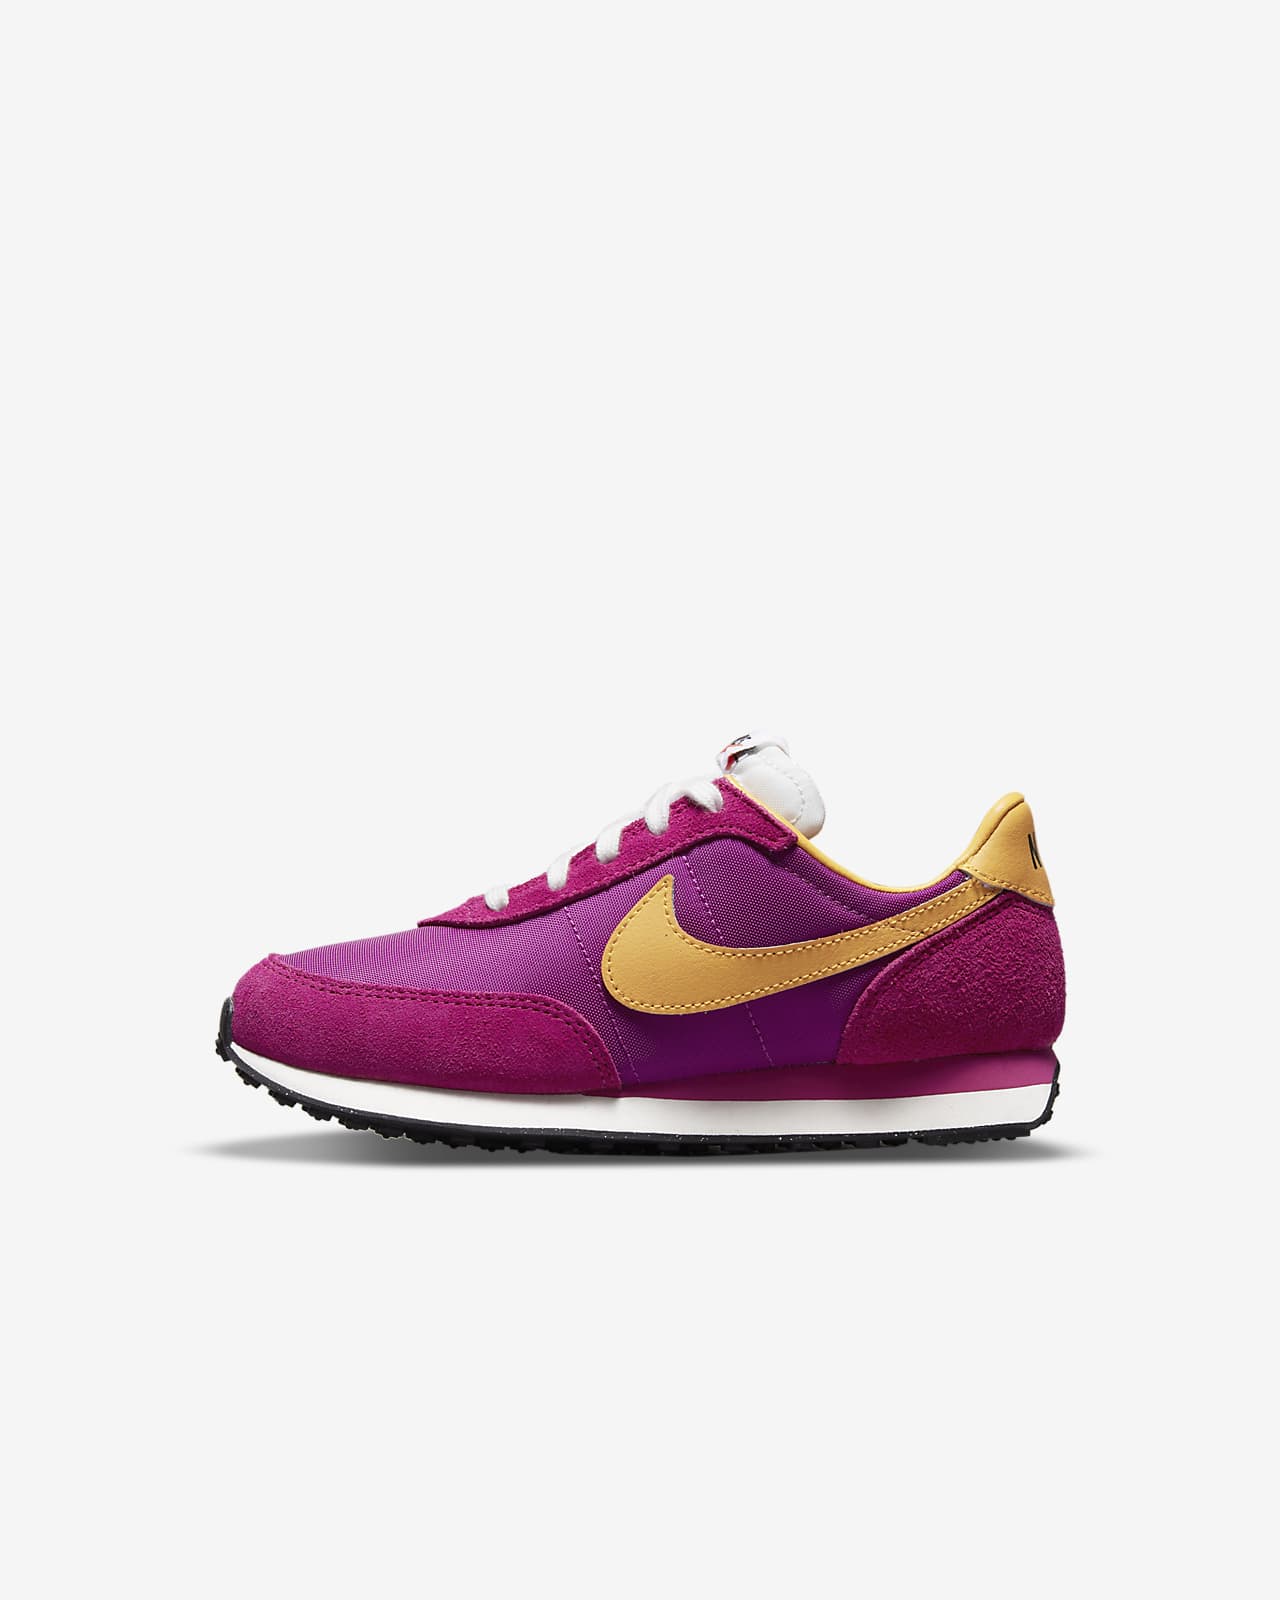 PS Nike Waffle Trainer 2 SP ‘Fireberry’